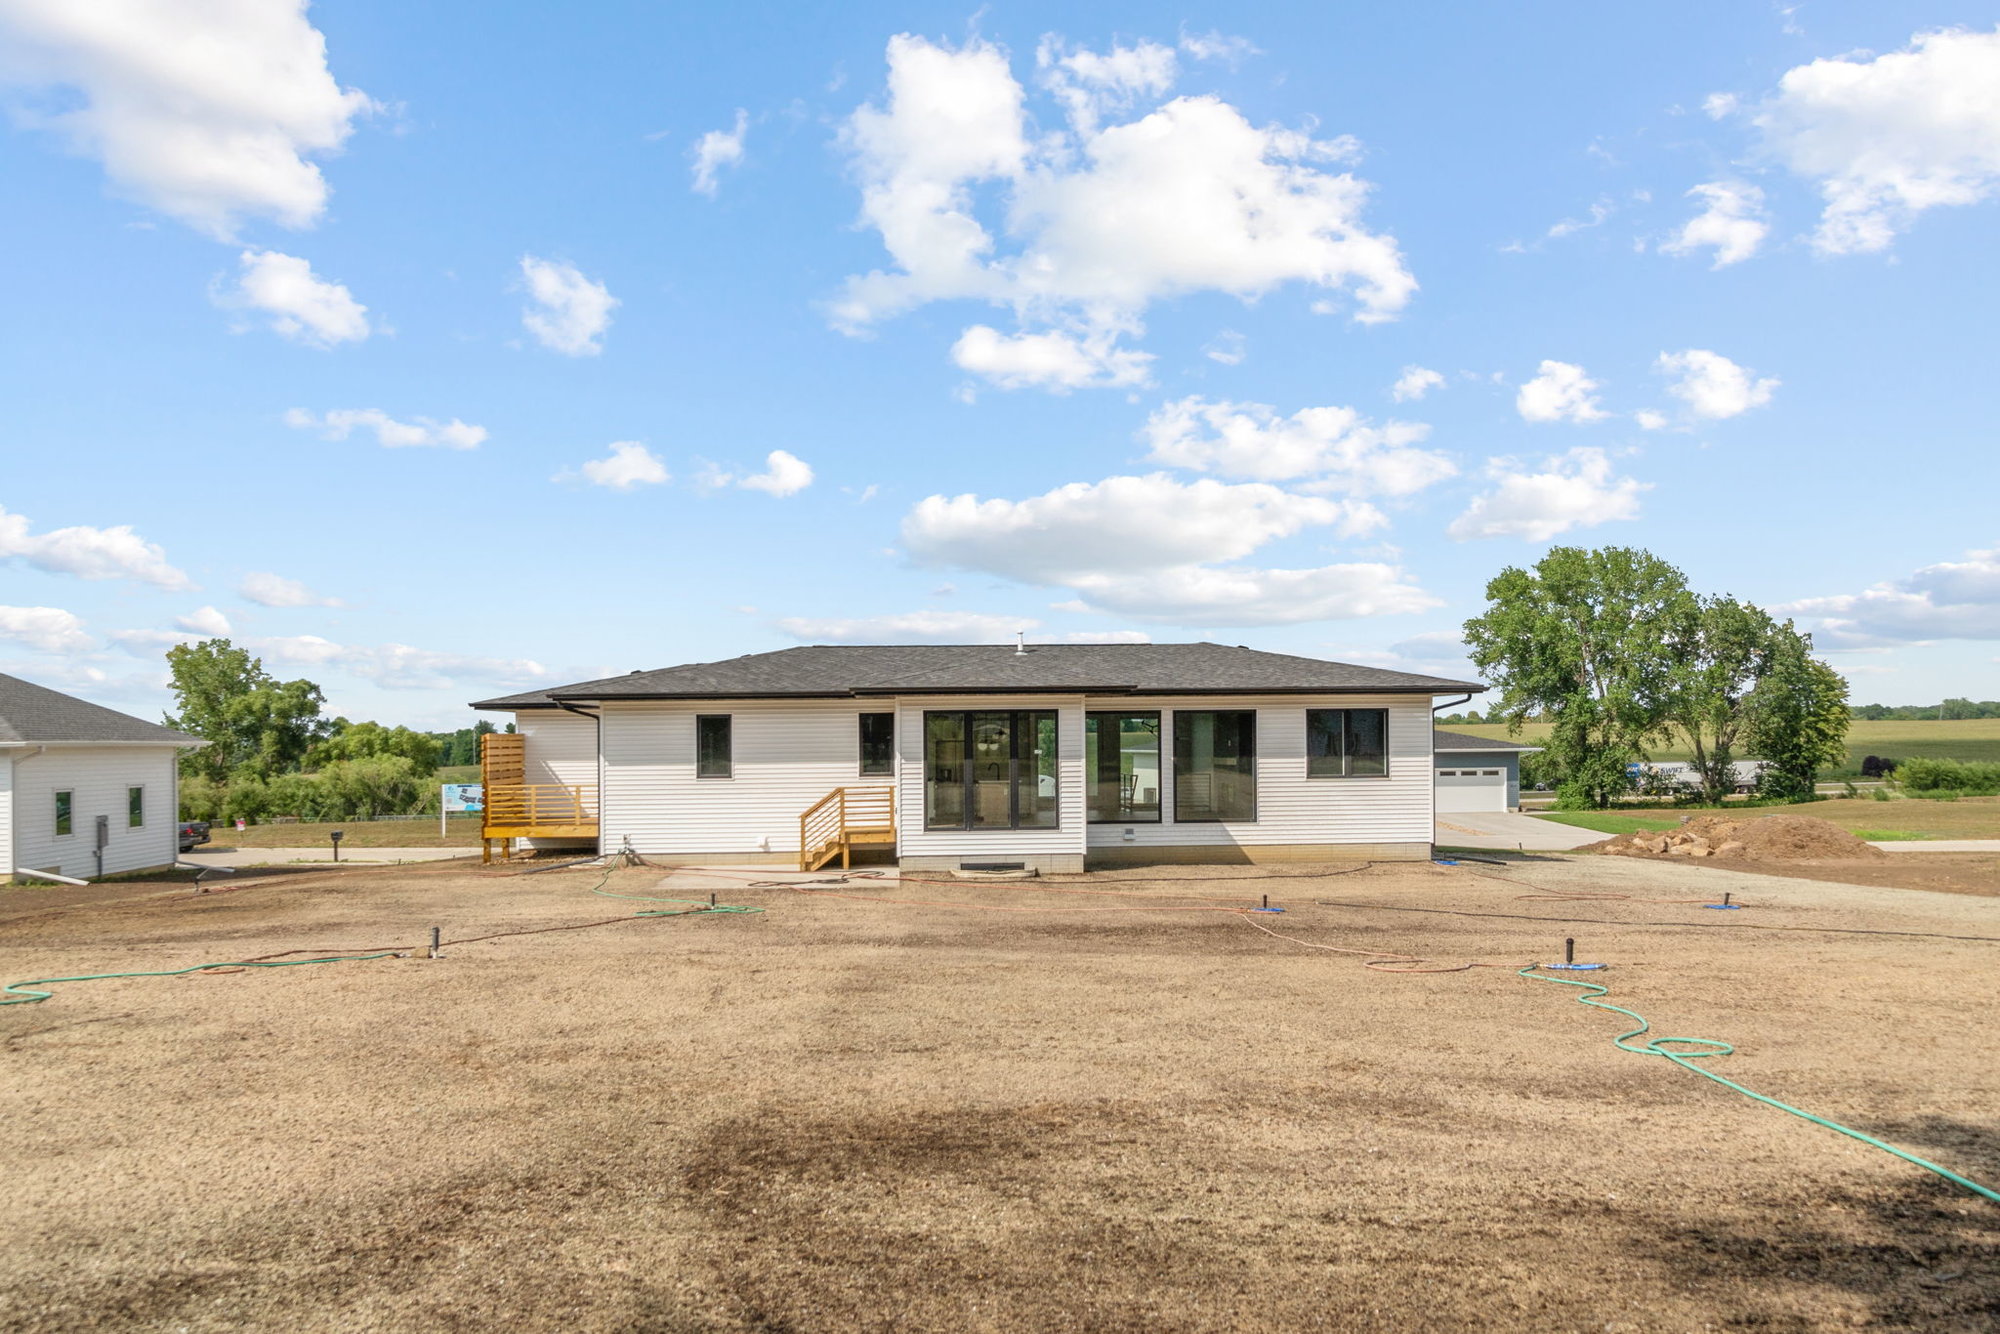 Modern, Sleek & Spacious. Everything You Wan is in this New Construction LGC Home in Cedar Falls Iowa